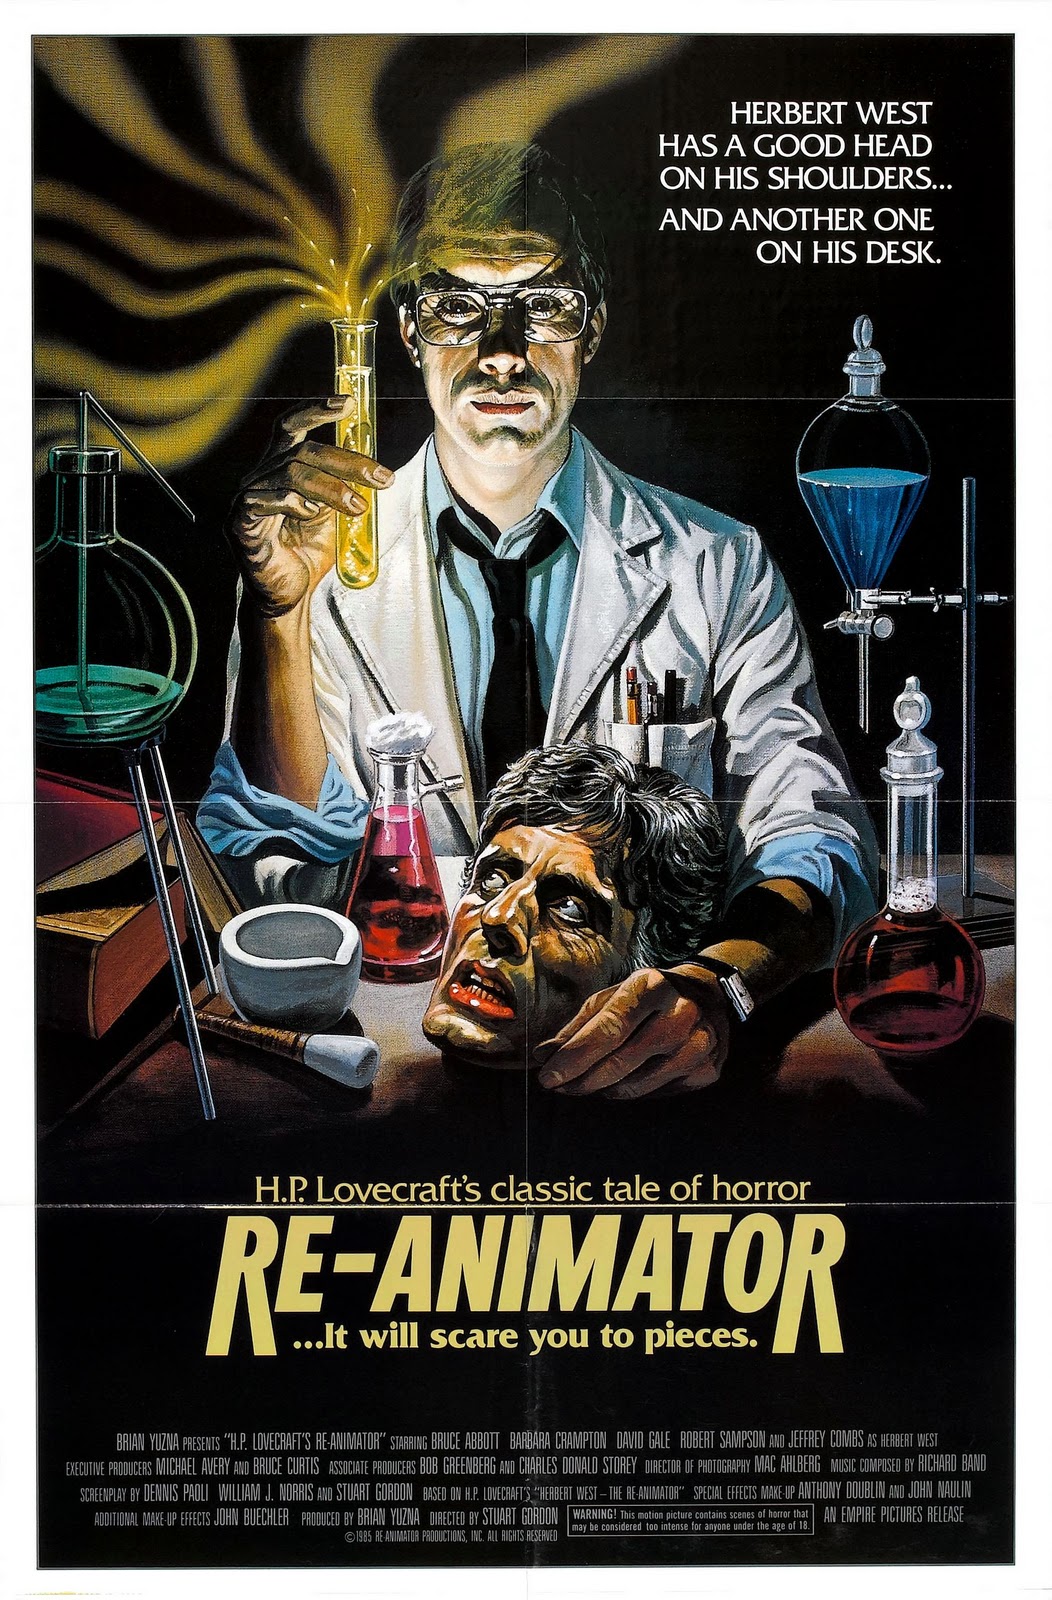 Episode 70 – Re-Animator Commentary Track